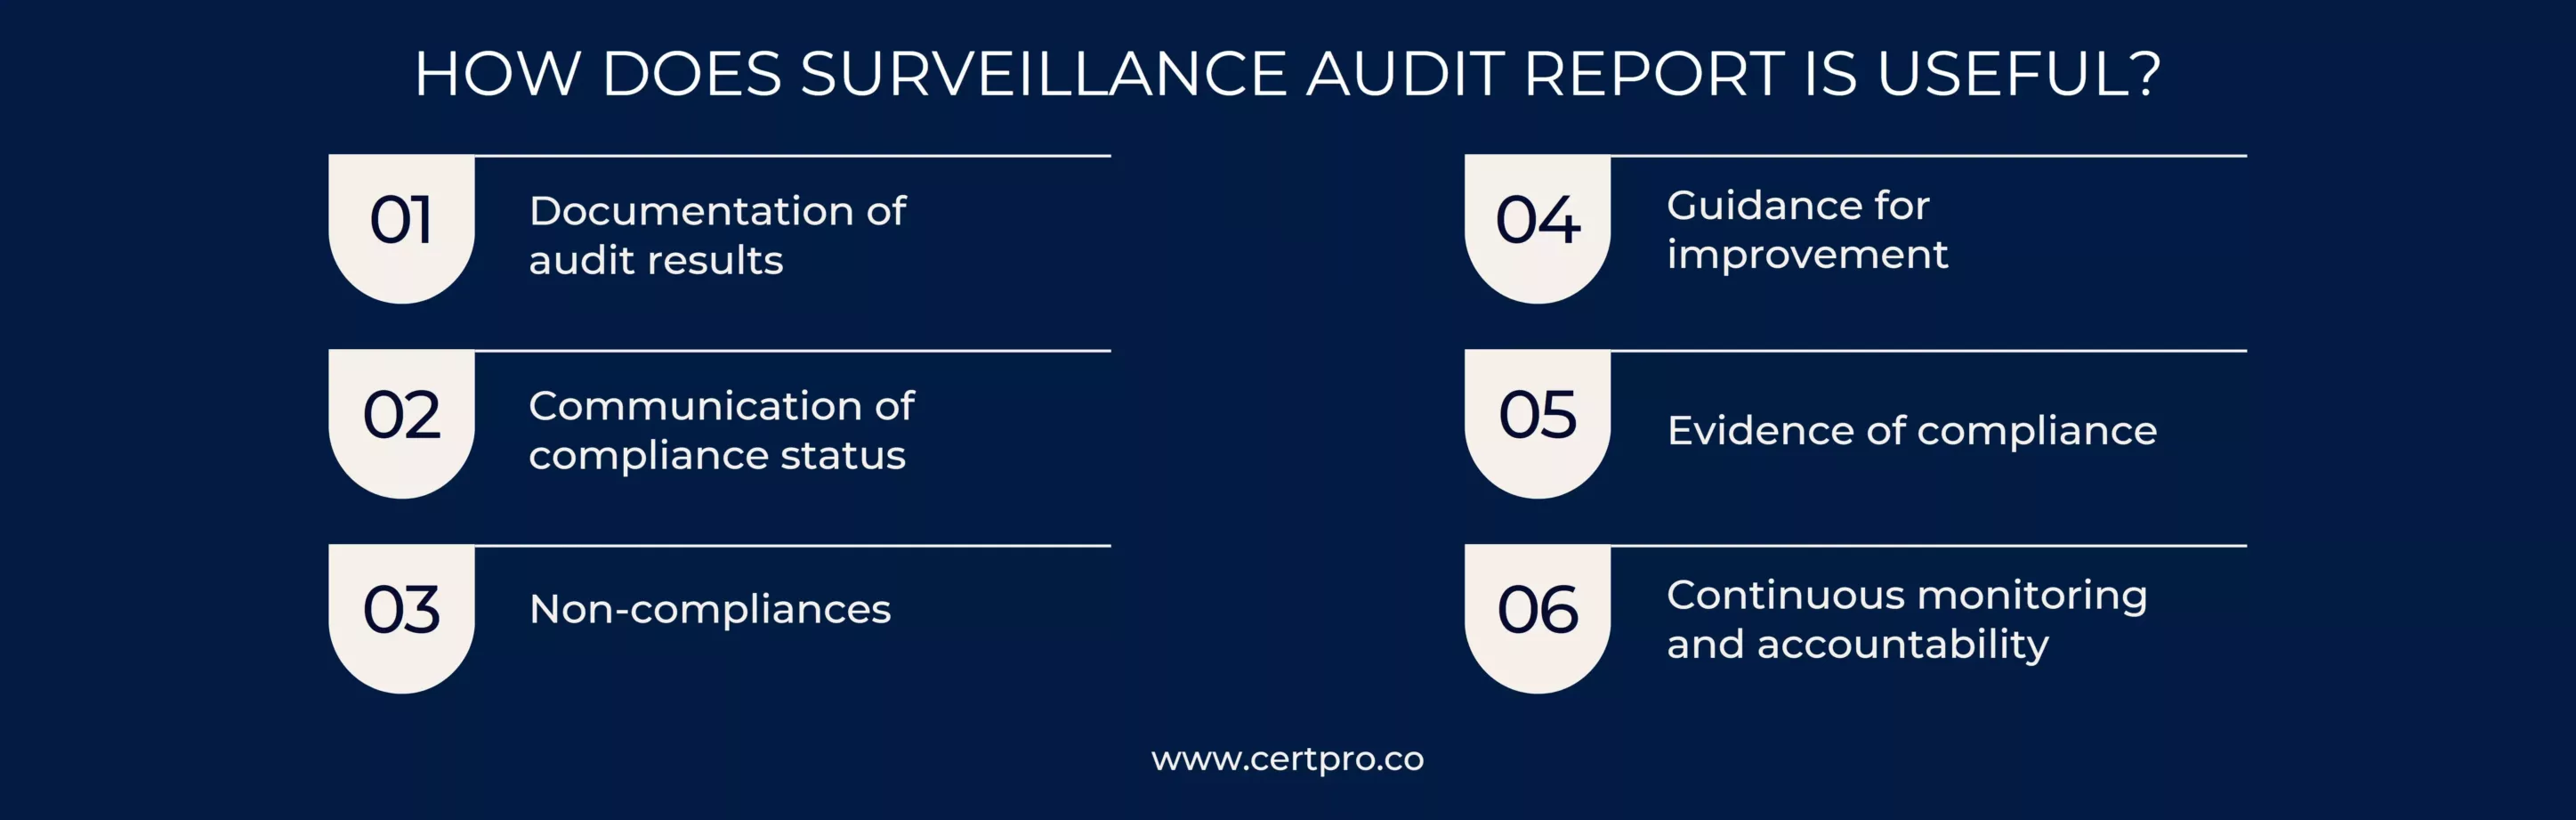 HOW DOES SURVEILLANCE AUDIT REPORT IS USEFUL